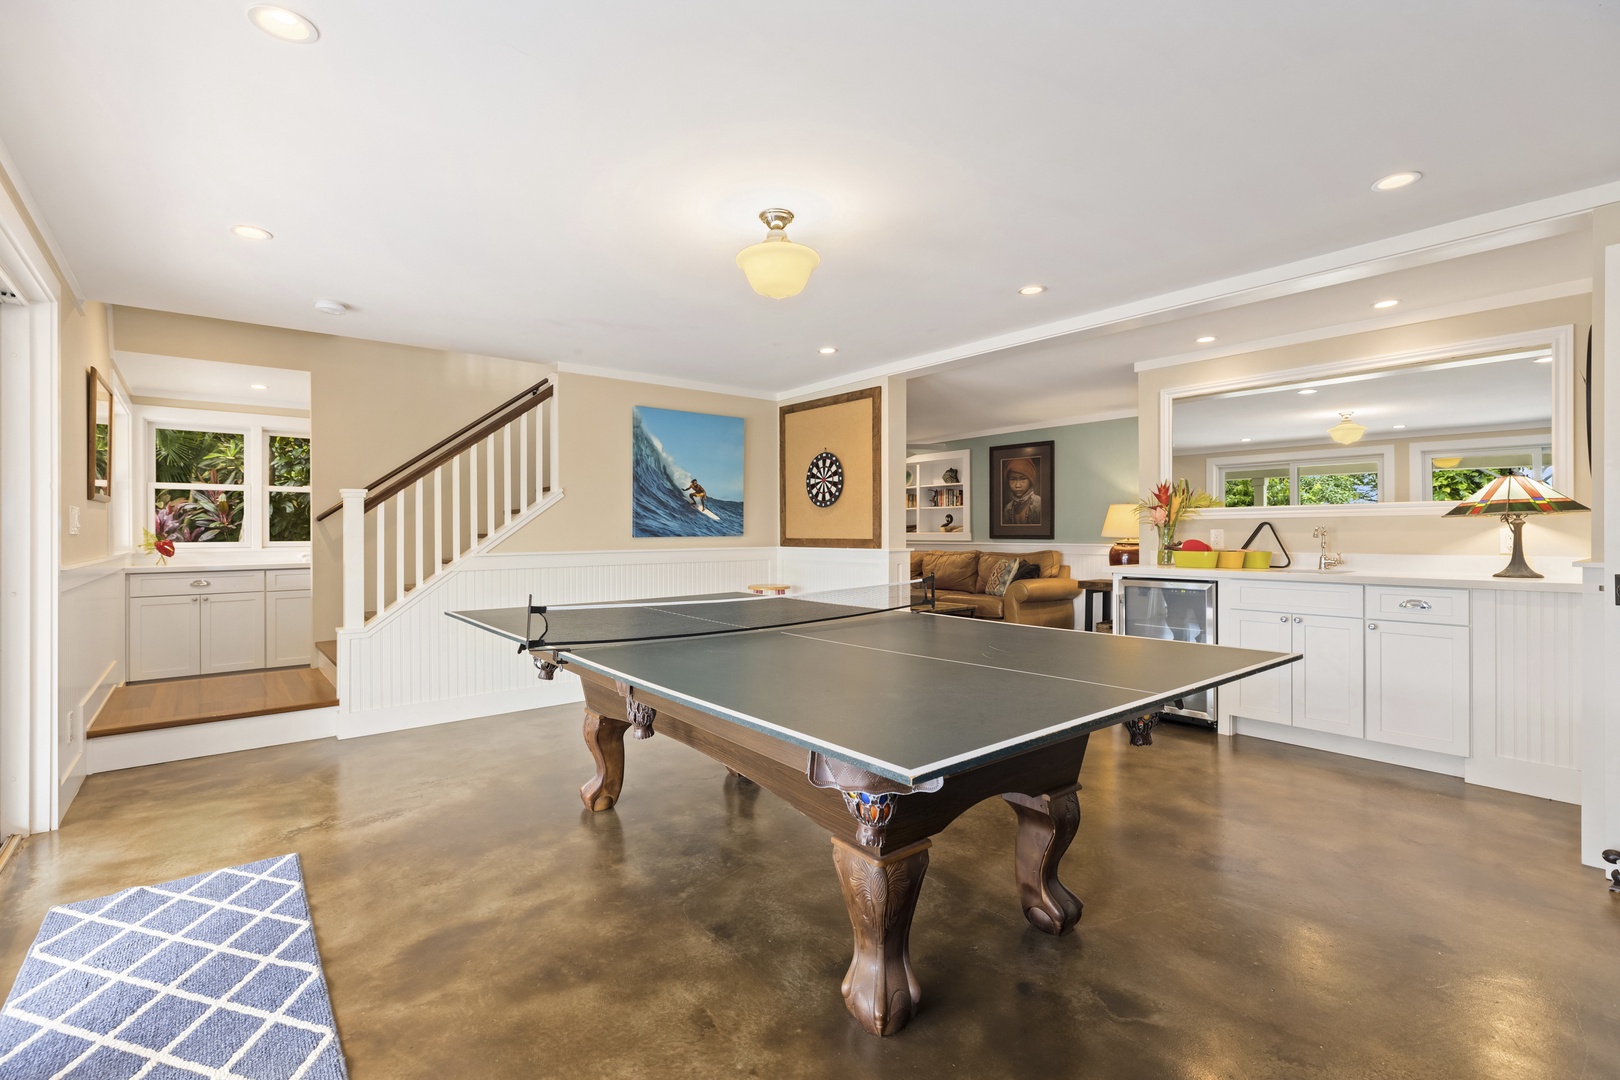 Honolulu Vacation Rentals, Hale Le'ahi* - Challenge guests to a game of pool or ping pong